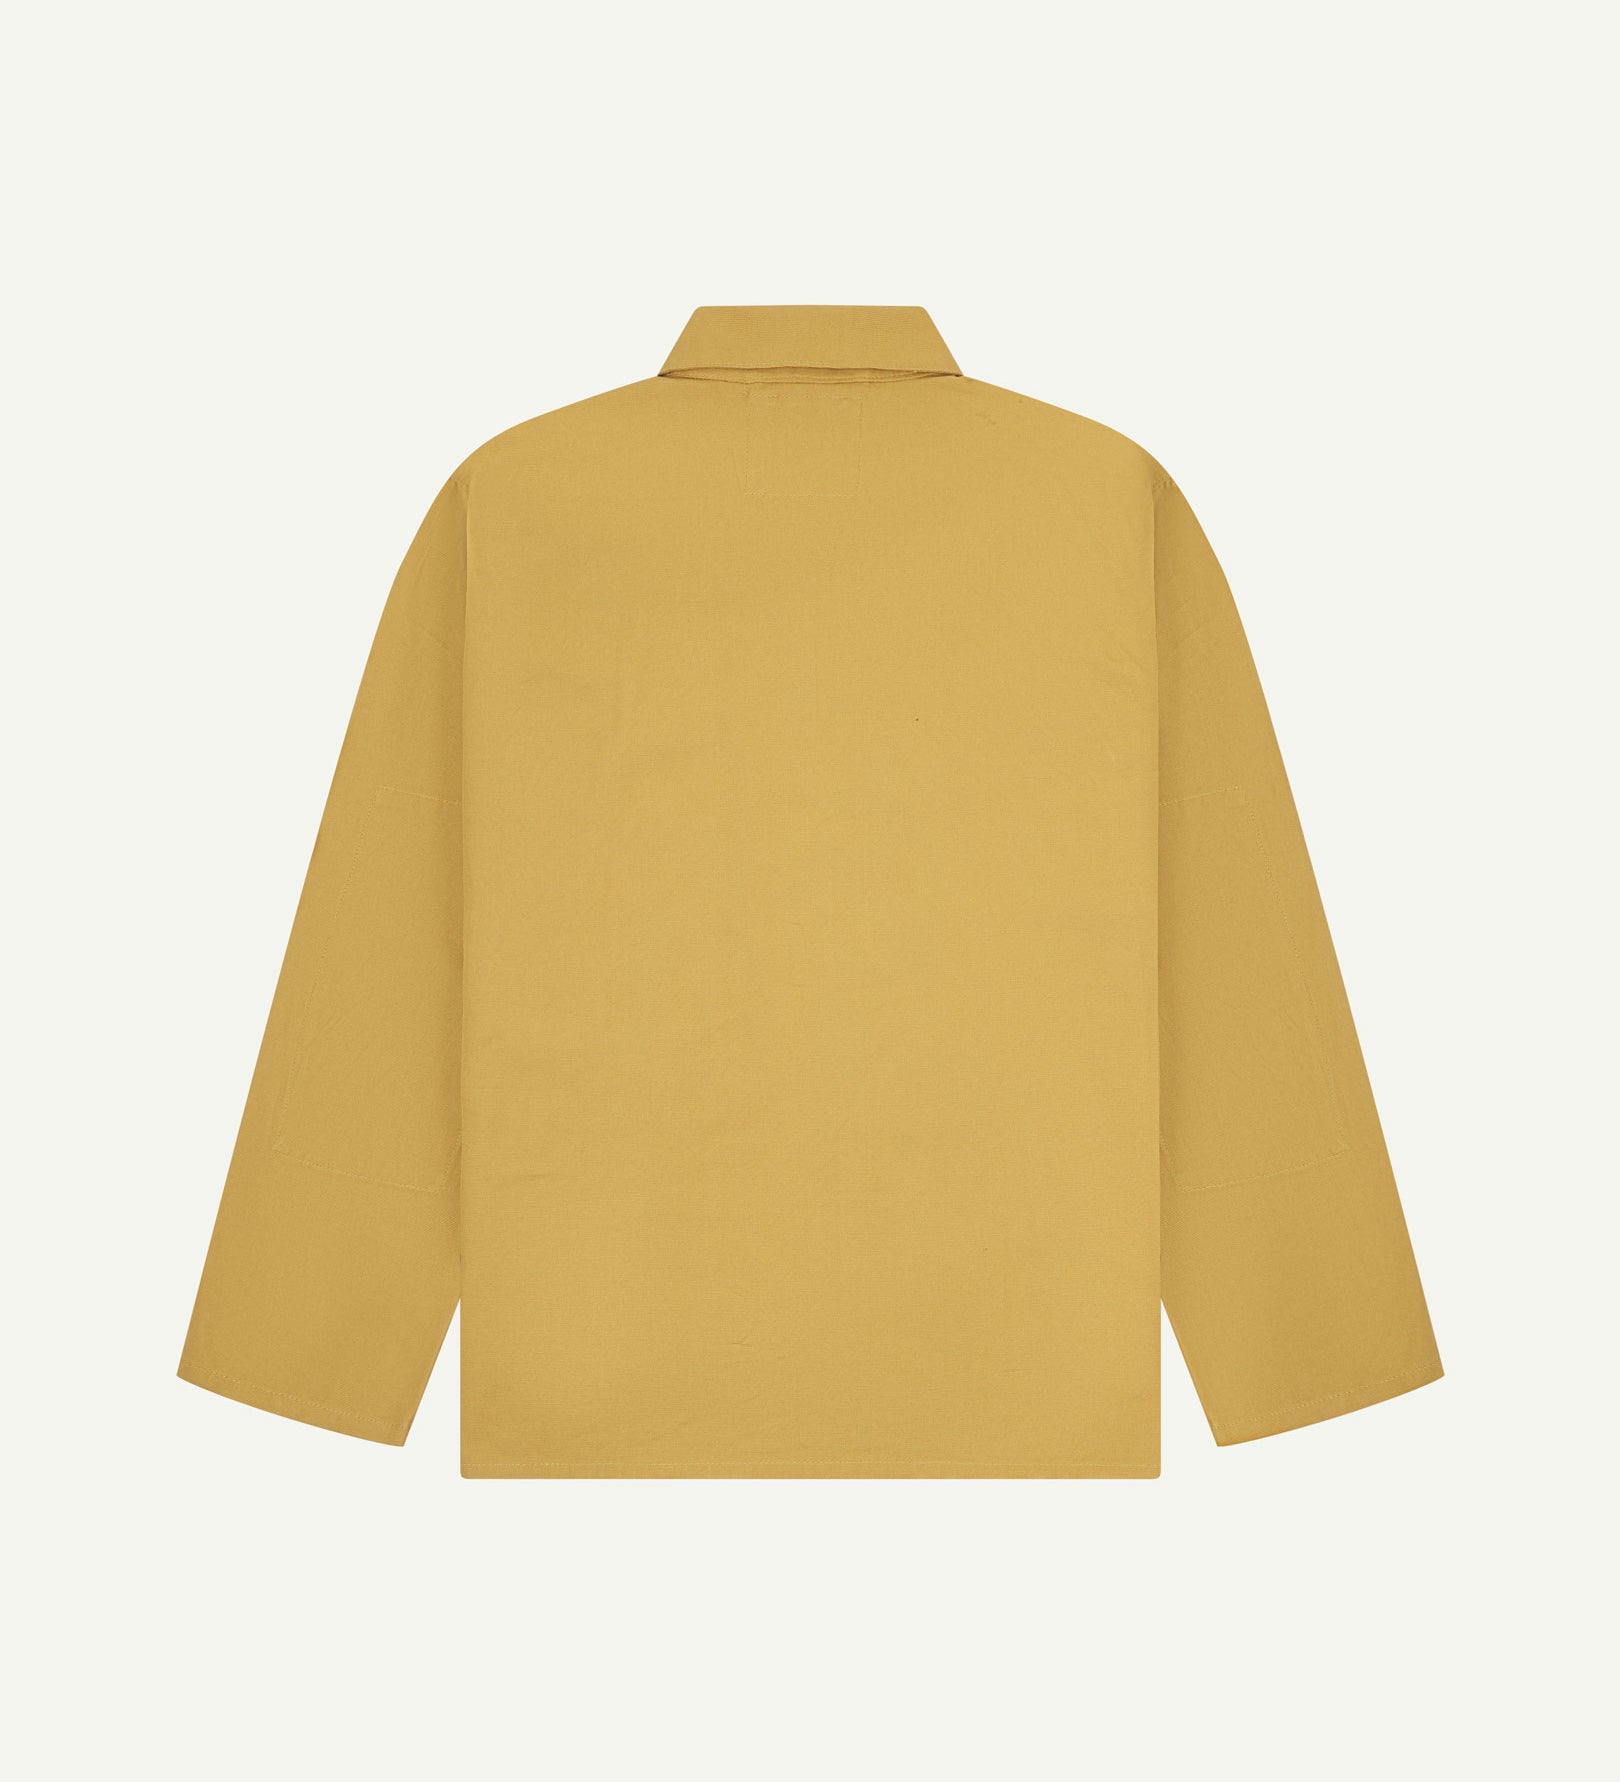 Back view of yellow (citronella), buttoned organic cotton overshirt with view of reinforced elbow area and boxy silhouette.